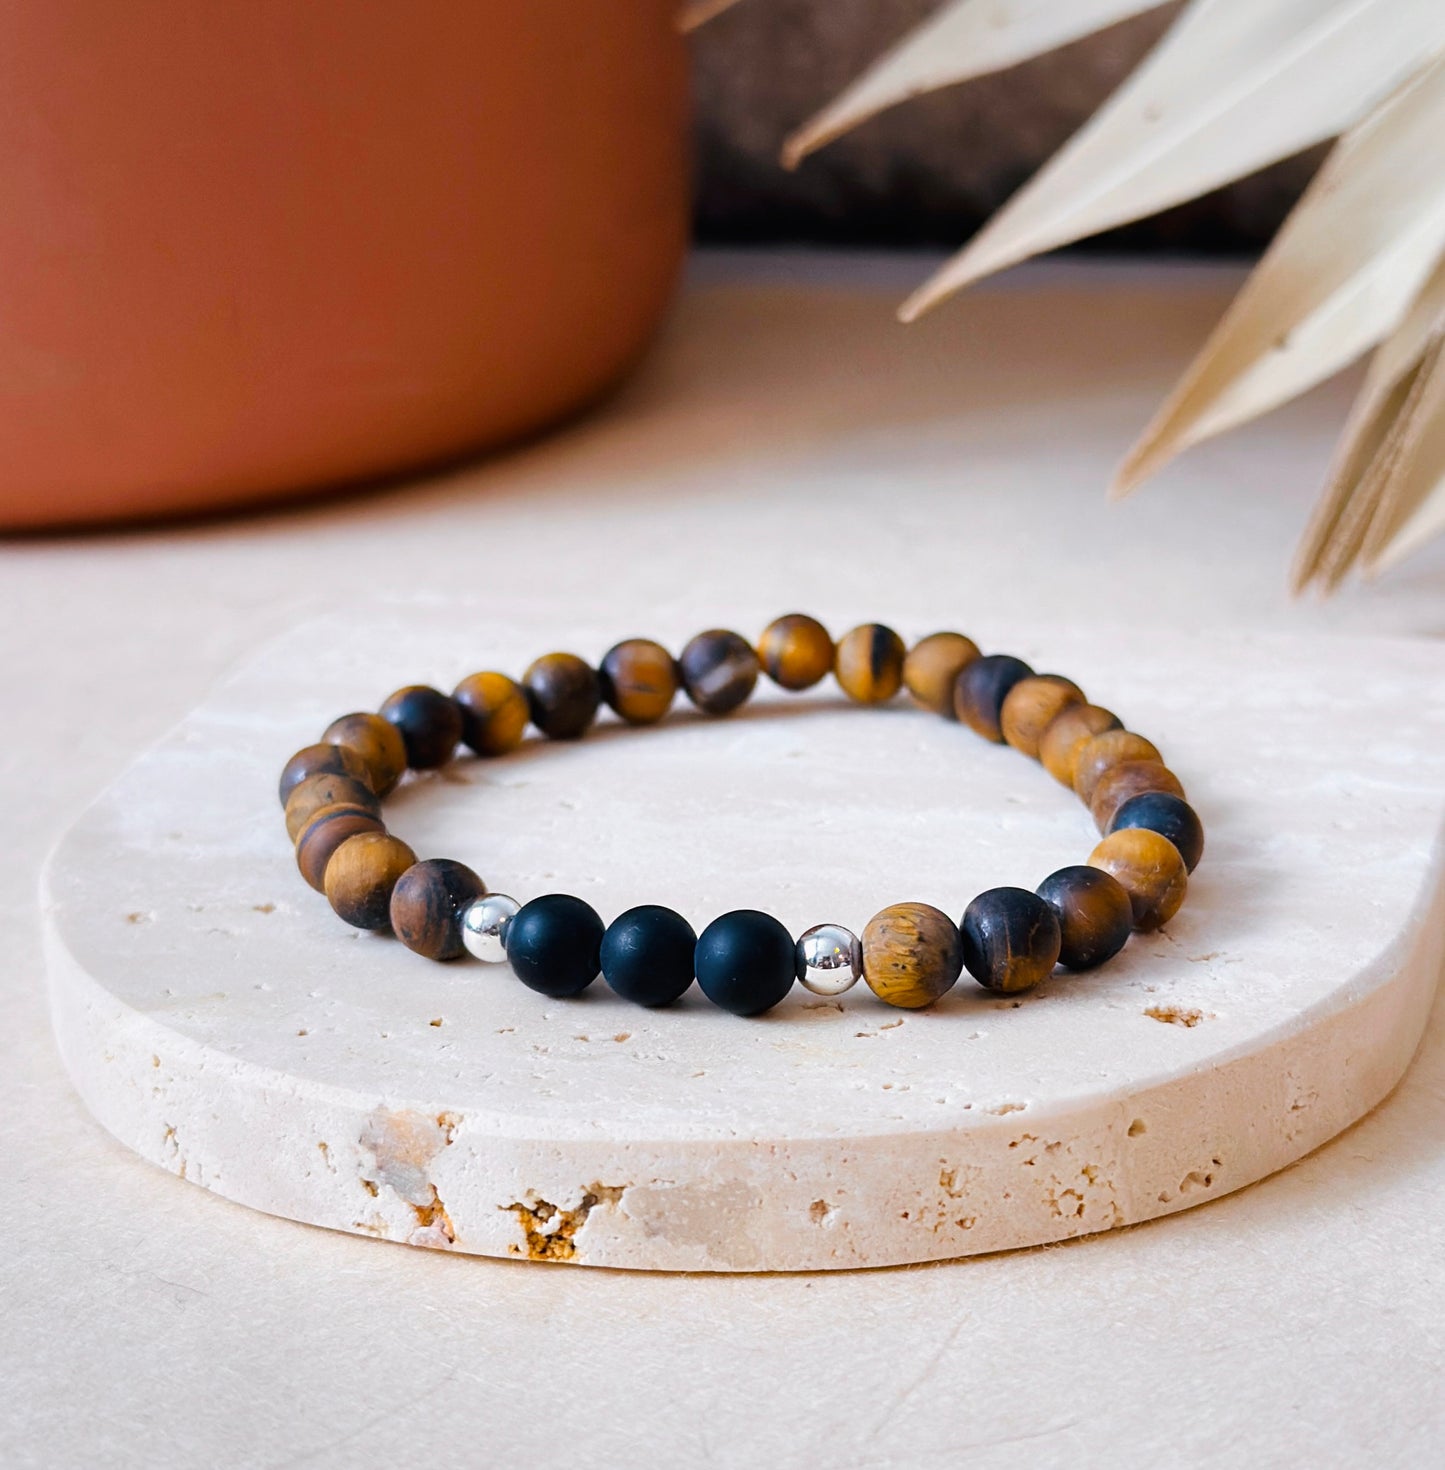 The Amber Tranquility Bracelet